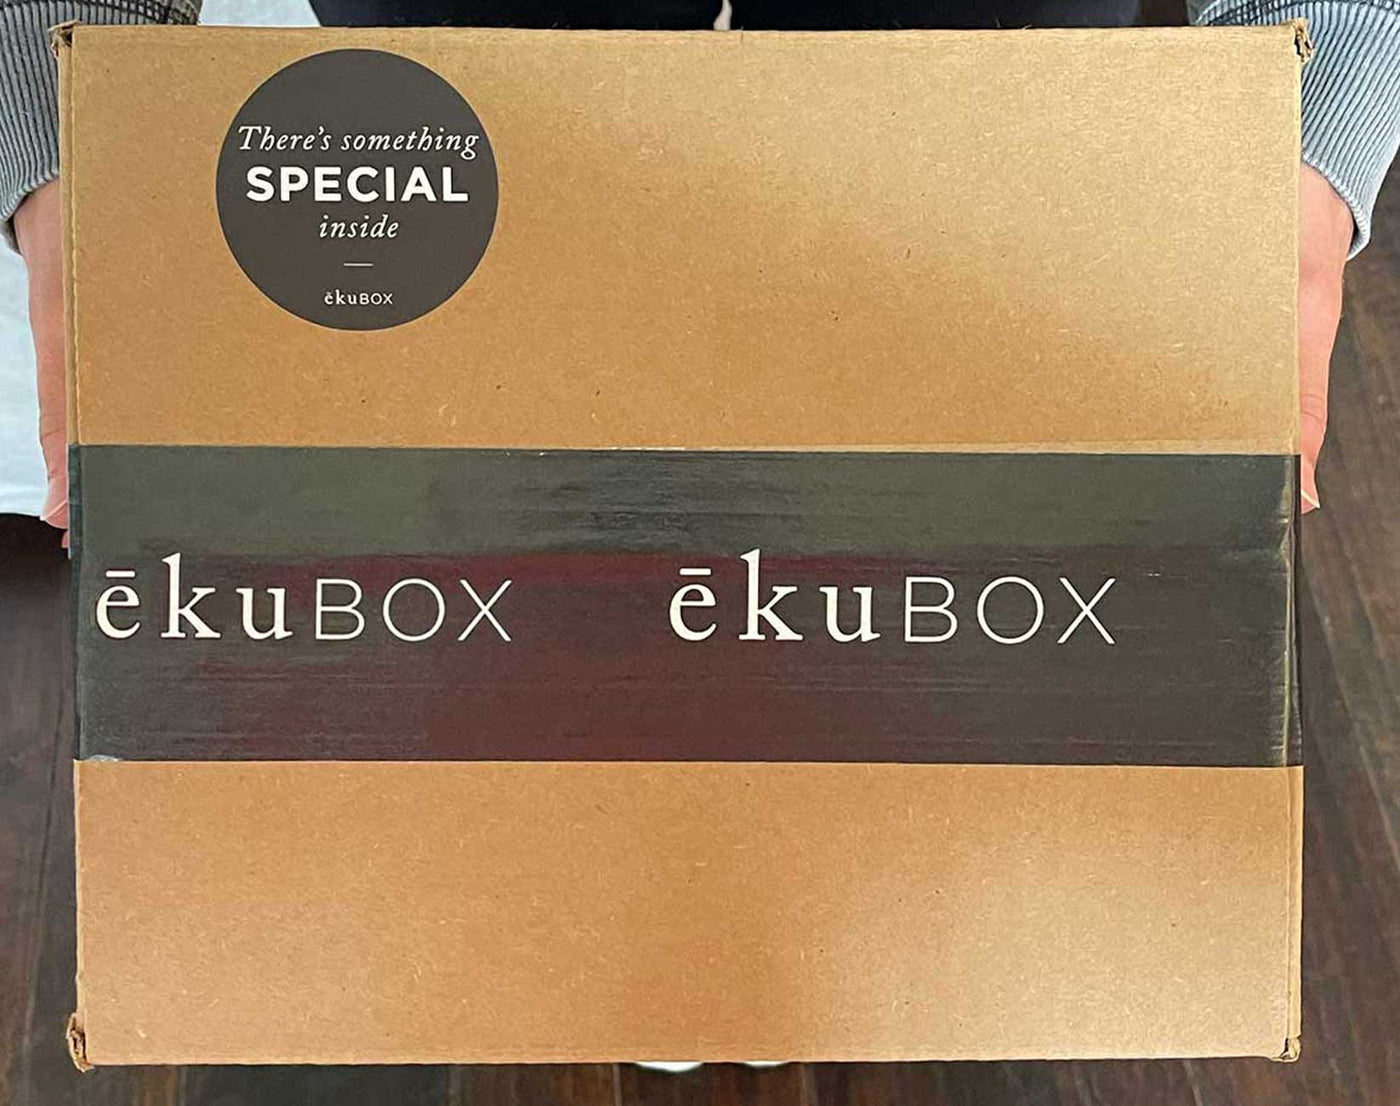 With ekuBOX - the difference is in the details. We use artisan products, organic products when possible, our packaging is second to none. Send the right message every time with our unique themed gift boxes. We make gifting easy.